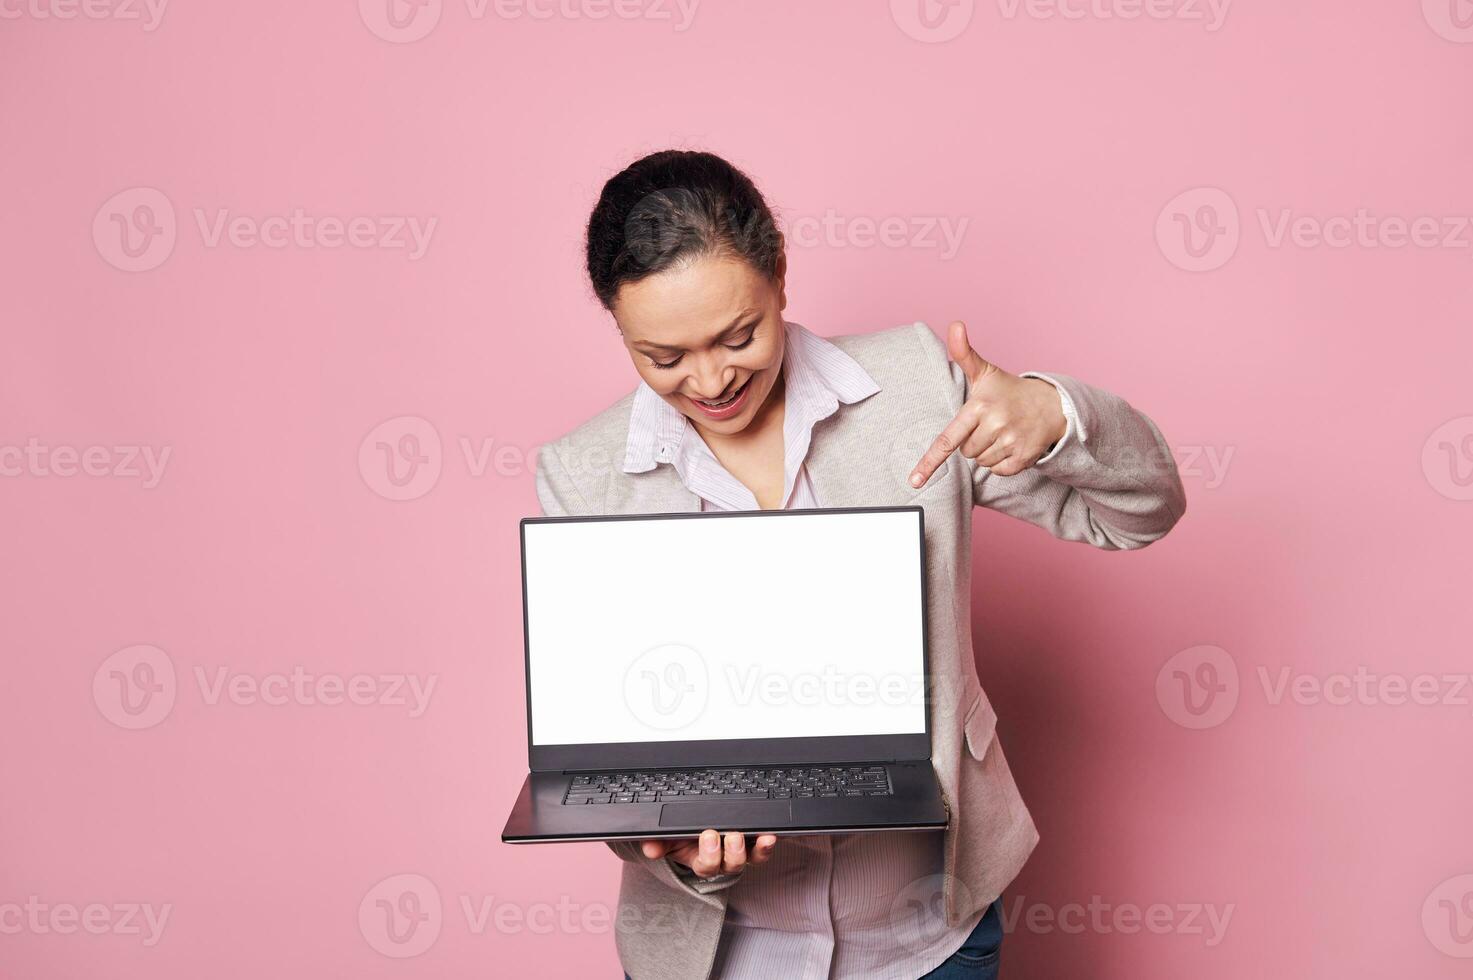 Smiling business woman office worker, manager showing on laptop a white digital screen with copy space for mobile apps photo